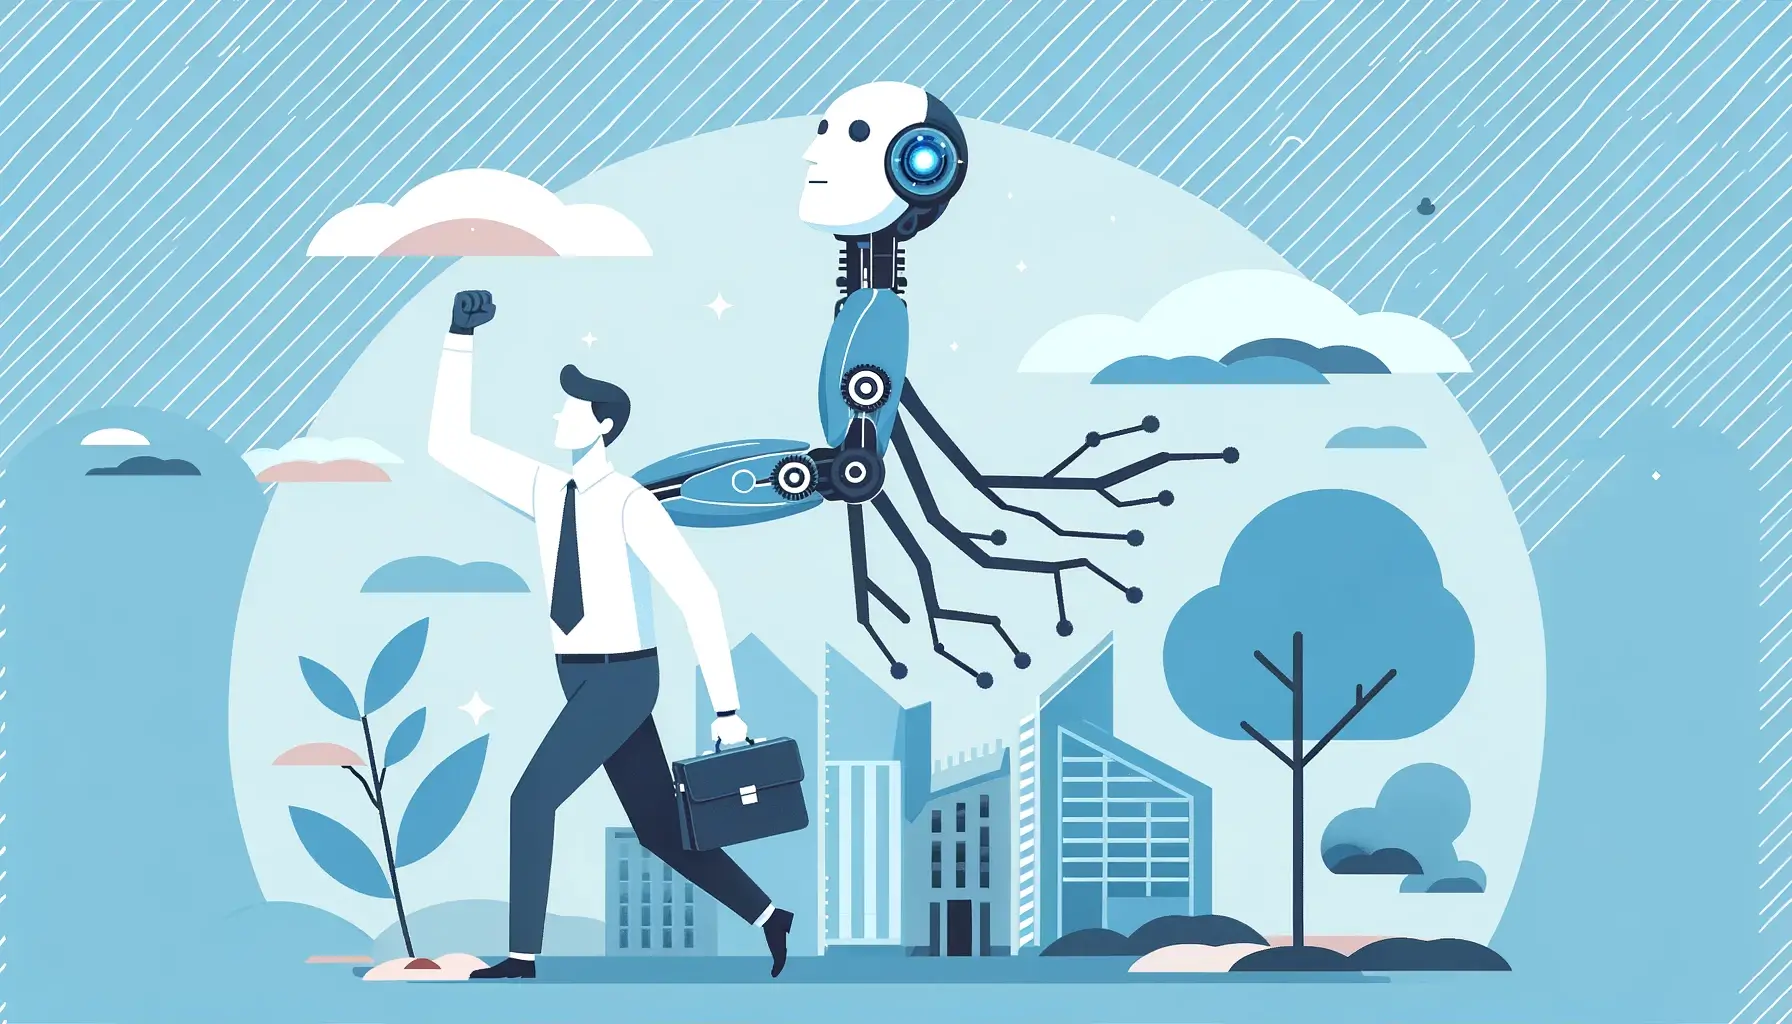 Flat-style illustration showing an entrepreneur lifting a building representing his business with one arm, powered by artificial intelligence. The image signifies the strength and support that new technology and innovative ideas provide to entrepreneurs, particularly in the realms of real estate, economic growth, and small business development. It emphasizes the concept of leveraging technology for business success and market expansion.